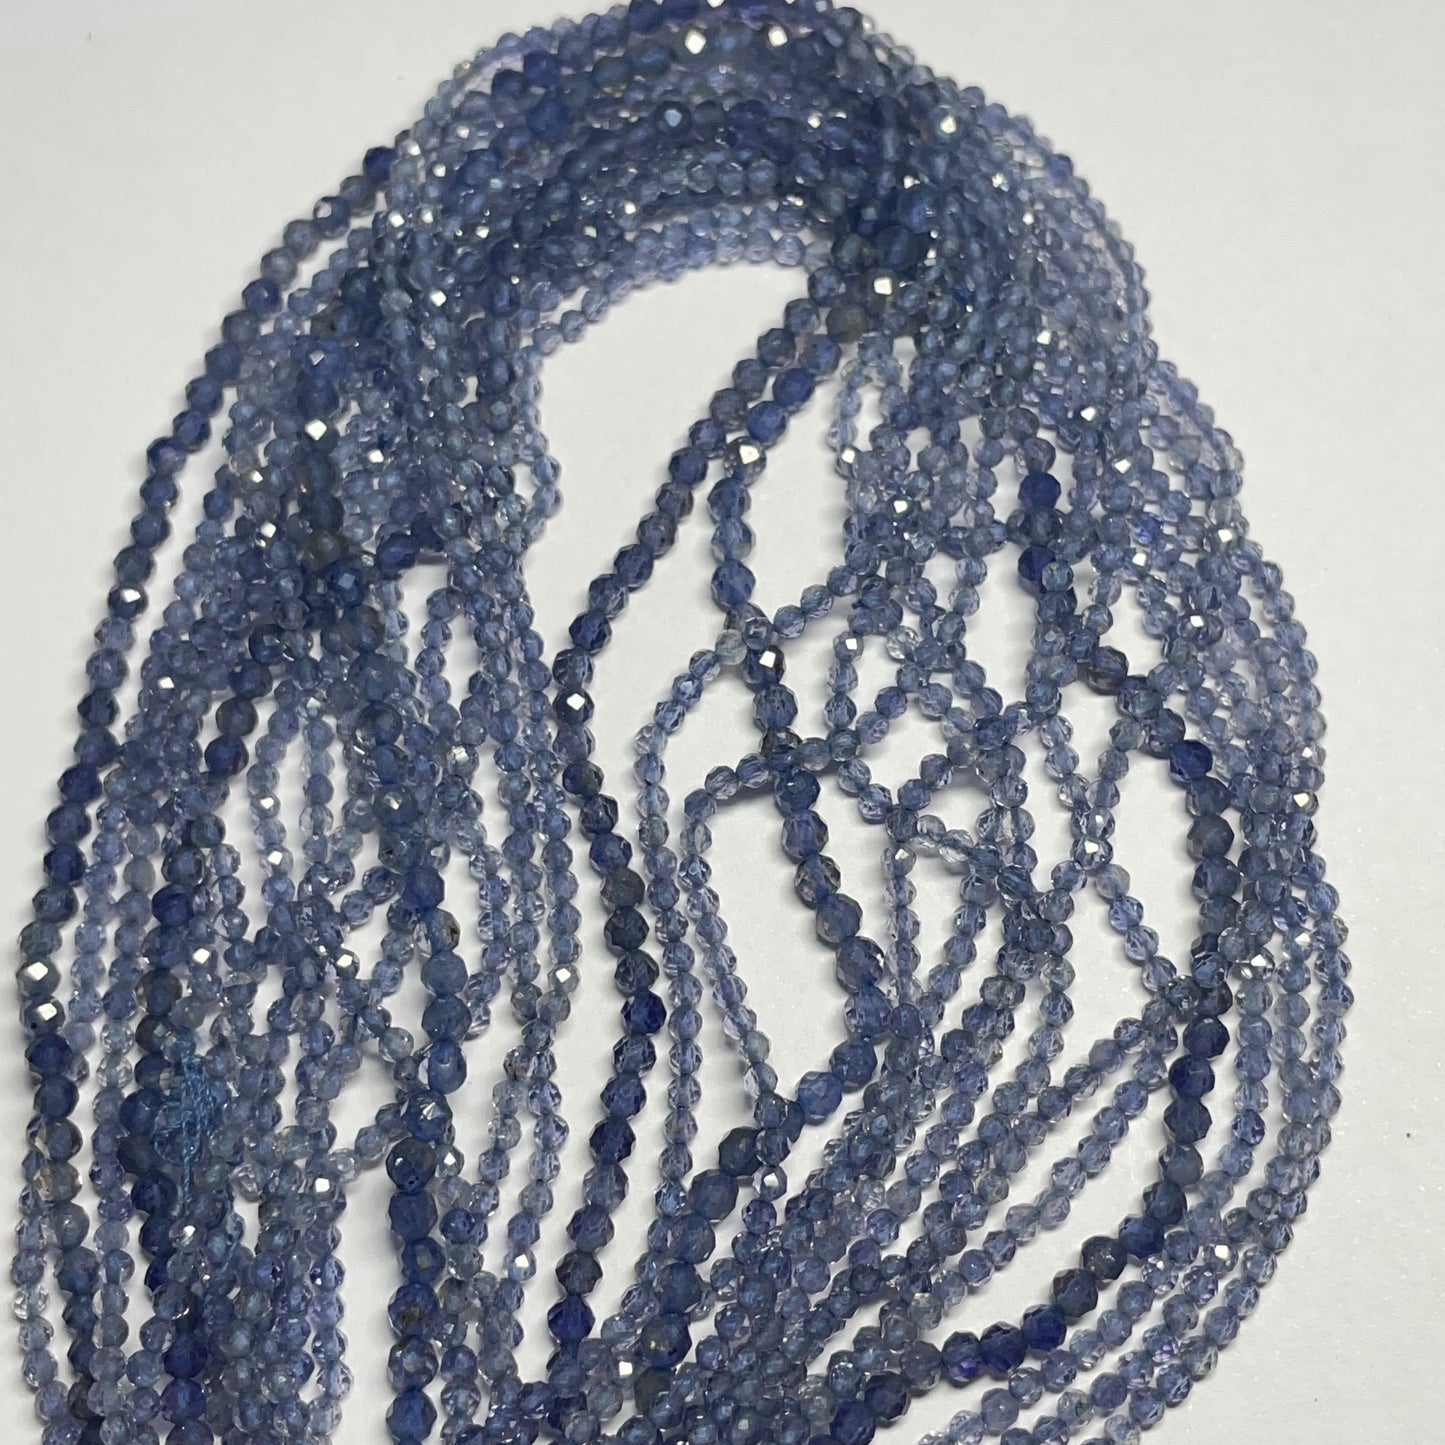 Natural Iolite Faceted Cut Beads (Natural)